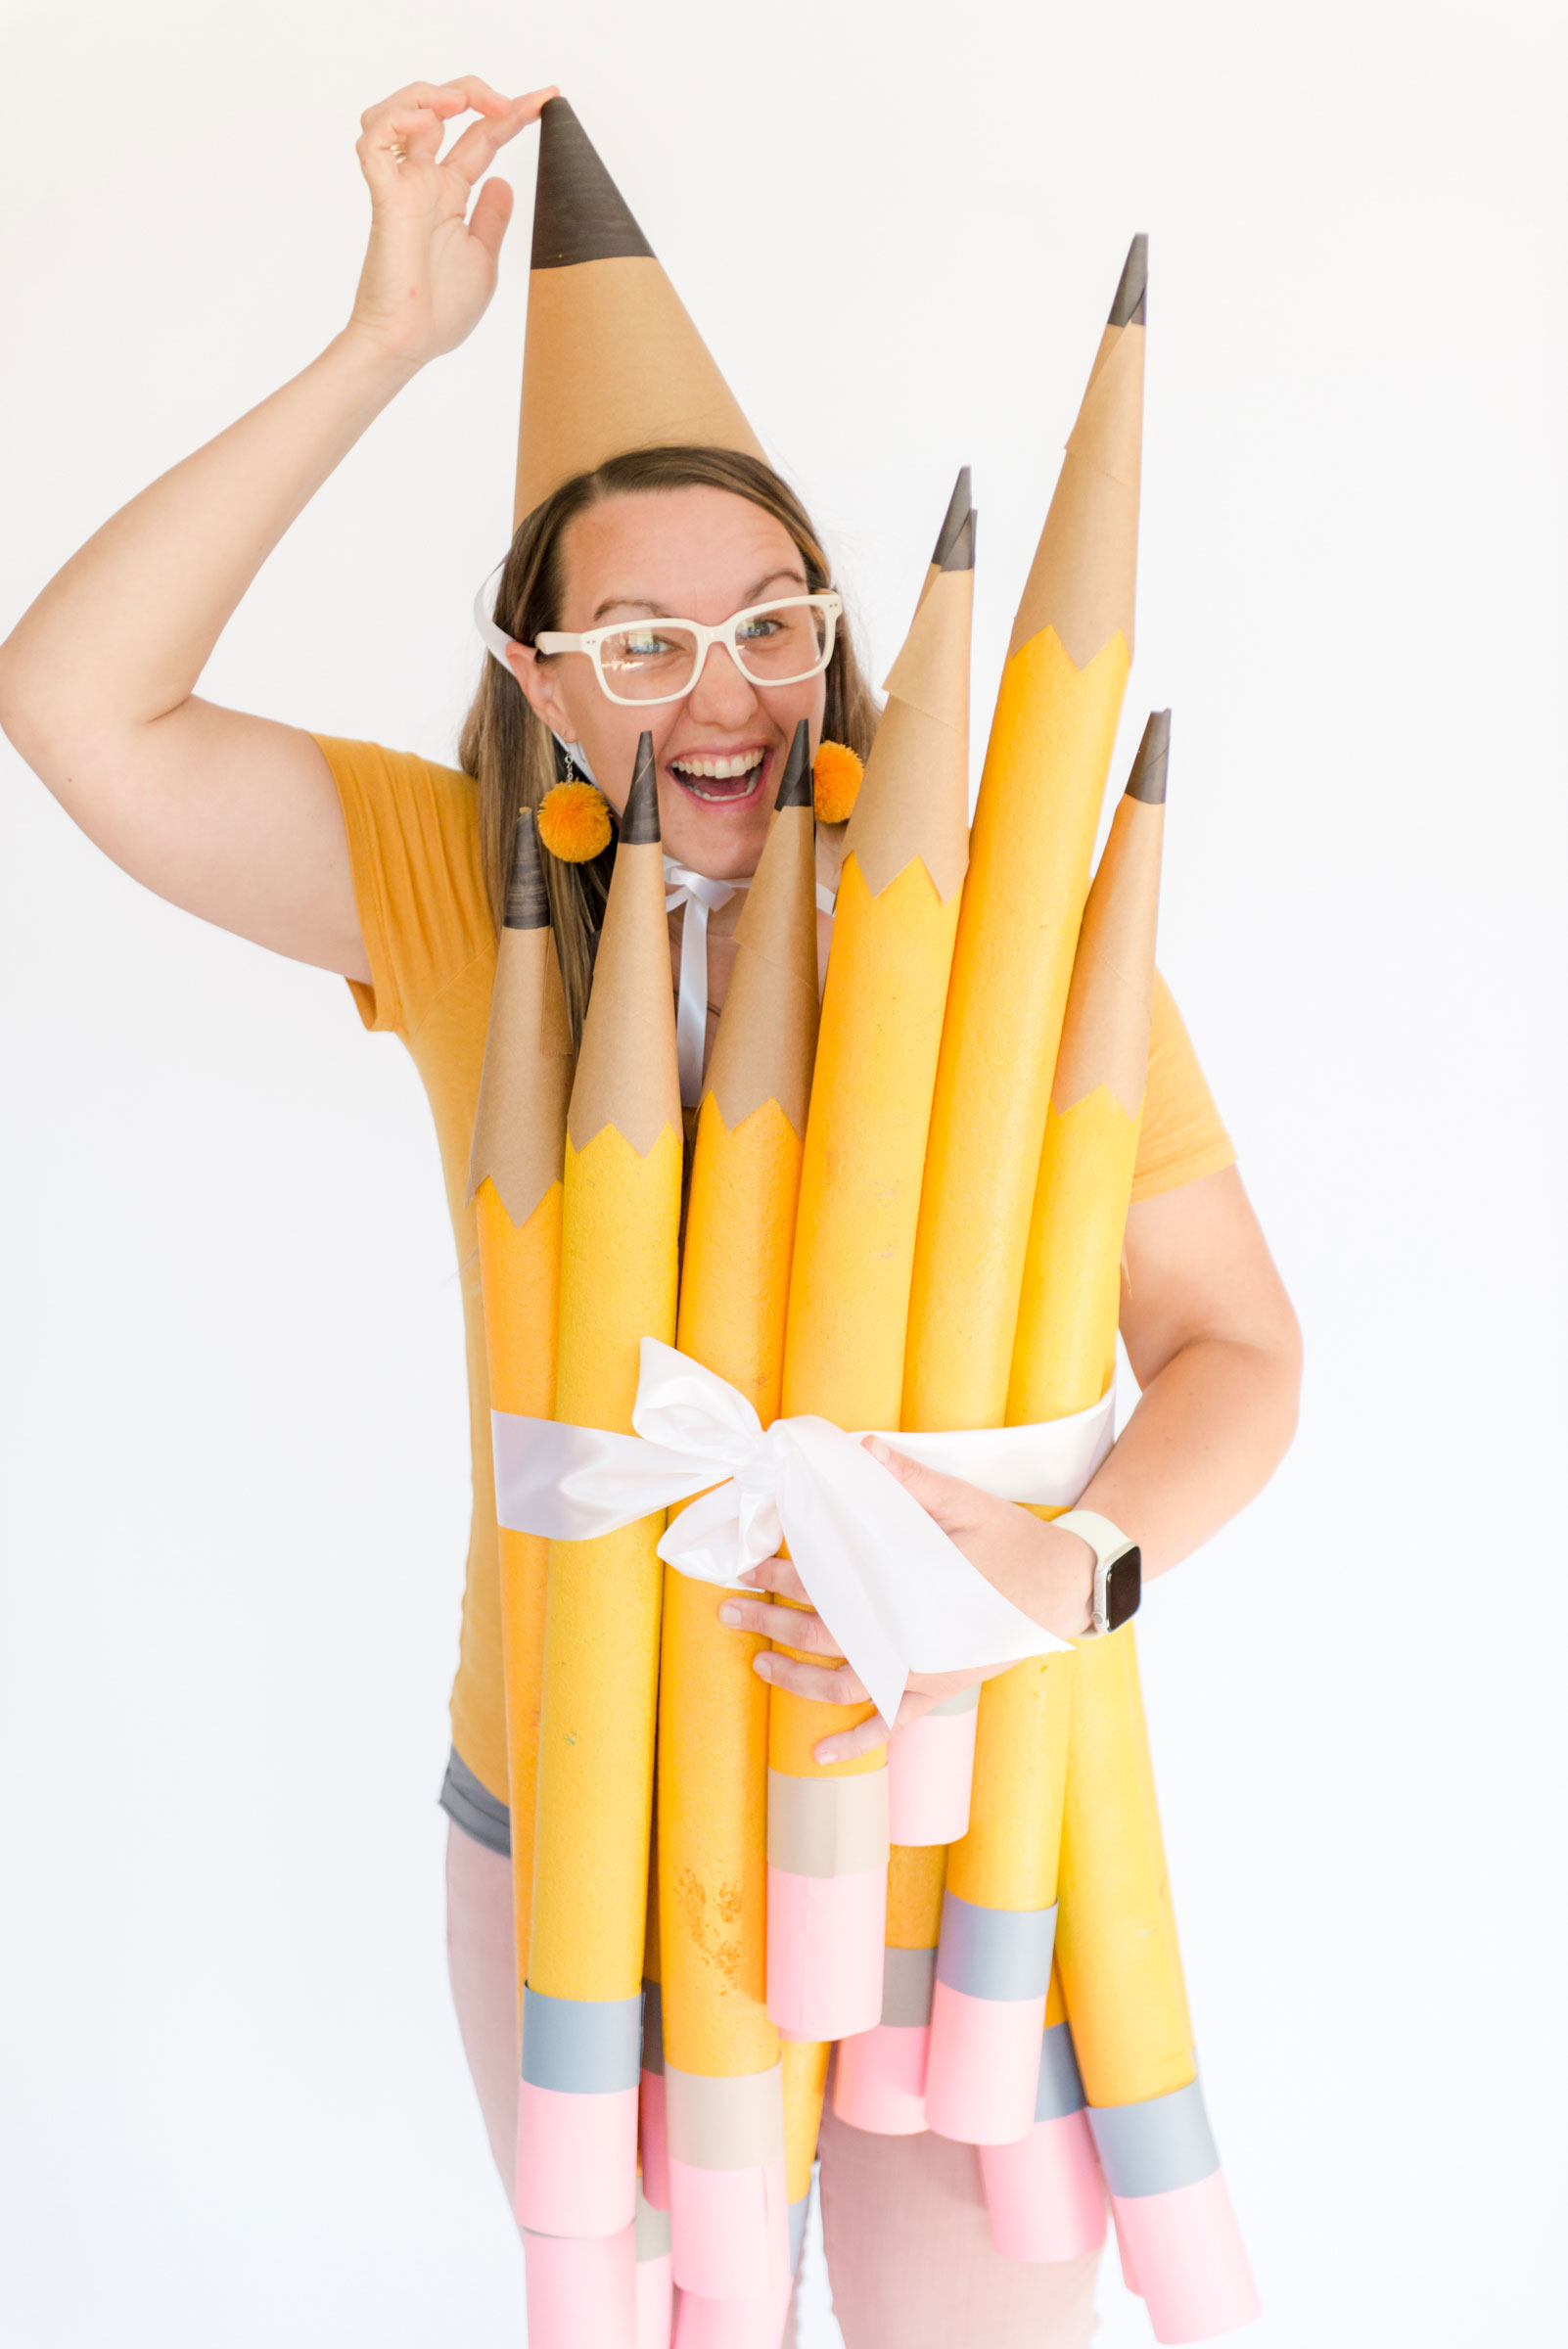 how to make large pencils out of pool noodles, large teacher pencils from pool noodles, large pool noodle crafts, pool noodle pencils